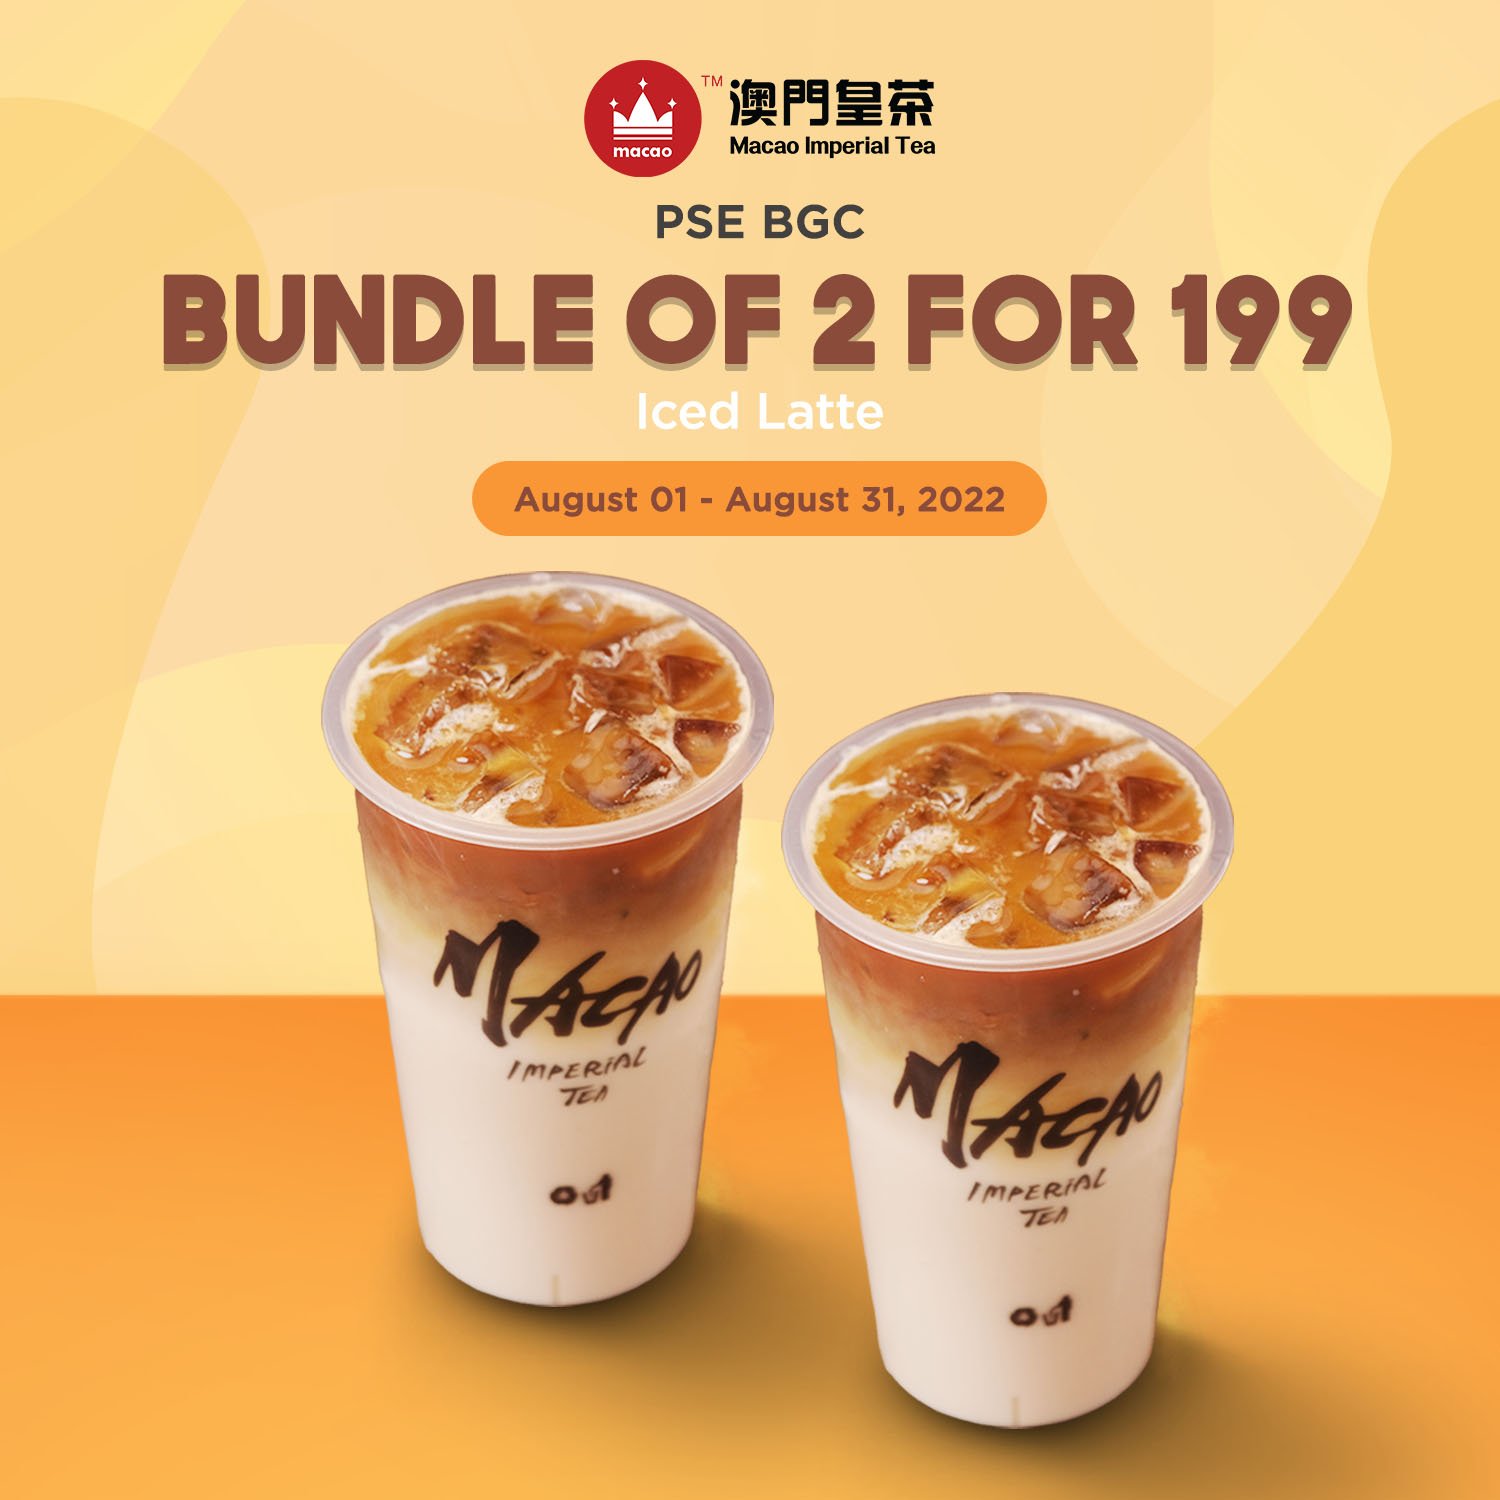 Macao Imperial Tea's Deals for August 2022